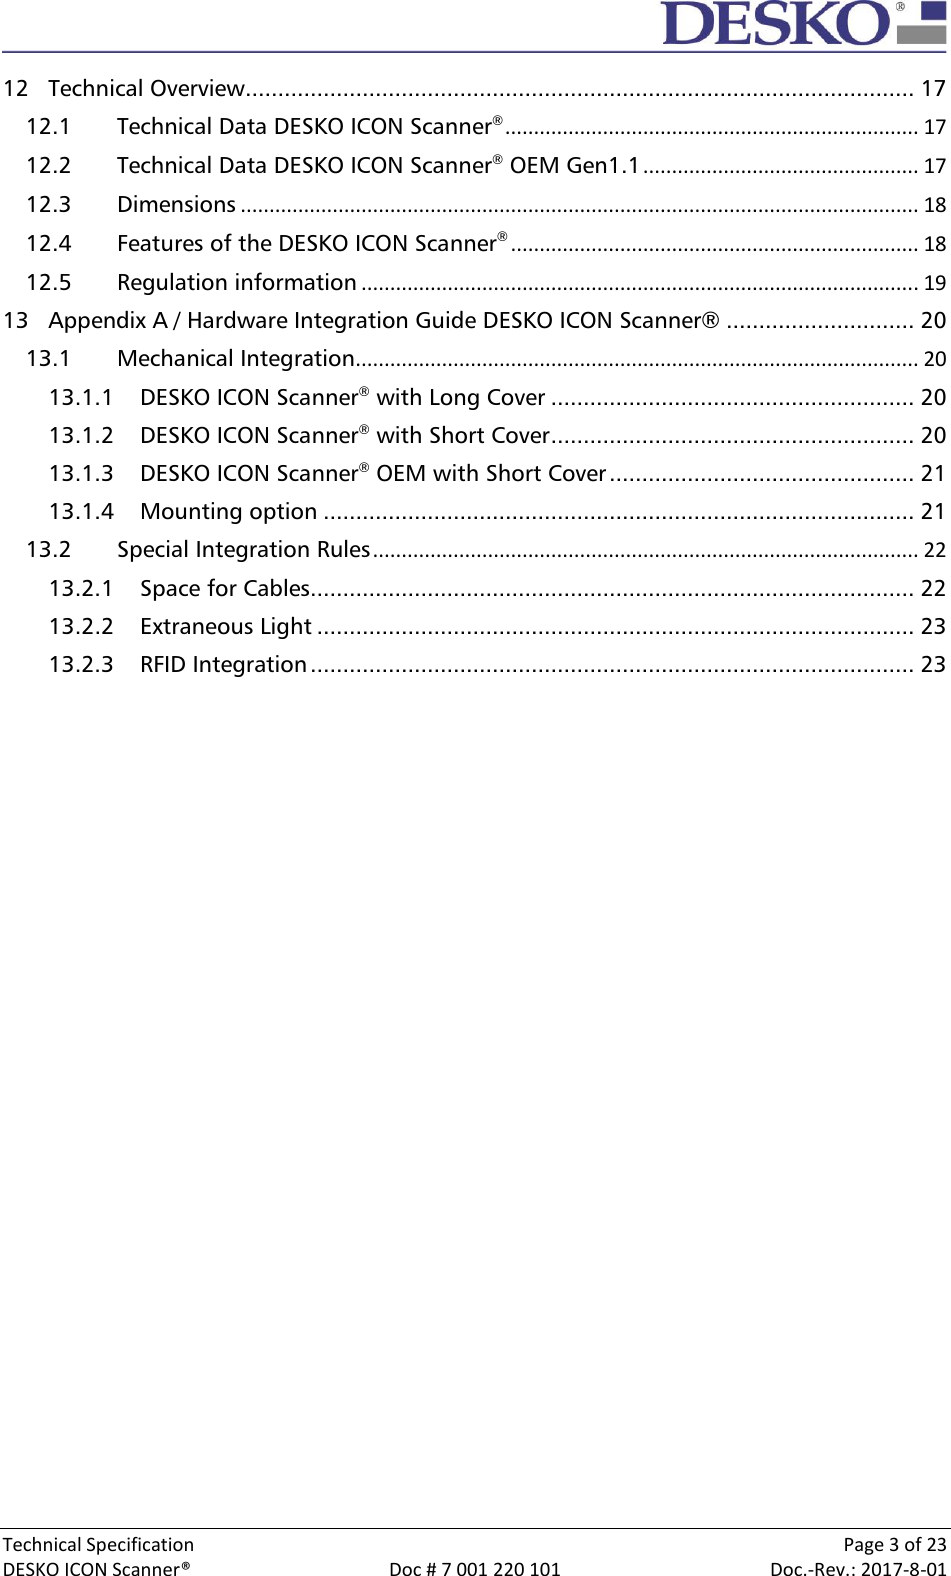  Technical Specification    Page 3 of 23 DESKO ICON Scanner®  Doc # 7 001 220 101  Doc.-Rev.: 2017-8-01  12 Technical Overview ....................................................................................................... 17 12.1 Technical Data DESKO ICON Scanner® ........................................................................ 17 12.2 Technical Data DESKO ICON Scanner® OEM Gen1.1 ................................................ 17 12.3 Dimensions ...................................................................................................................... 18 12.4 Features of the DESKO ICON Scanner® ....................................................................... 18 12.5 Regulation information ................................................................................................. 19 13 Appendix A / Hardware Integration Guide DESKO ICON Scanner® ............................. 20 13.1 Mechanical Integration .................................................................................................. 20 13.1.1 DESKO ICON Scanner® with Long Cover ........................................................ 20 13.1.2 DESKO ICON Scanner® with Short Cover ........................................................ 20 13.1.3 DESKO ICON Scanner® OEM with Short Cover ............................................... 21 13.1.4 Mounting option ........................................................................................... 21 13.2 Special Integration Rules ............................................................................................... 22 13.2.1 Space for Cables............................................................................................. 22 13.2.2 Extraneous Light ............................................................................................ 23 13.2.3 RFID Integration ............................................................................................. 23     